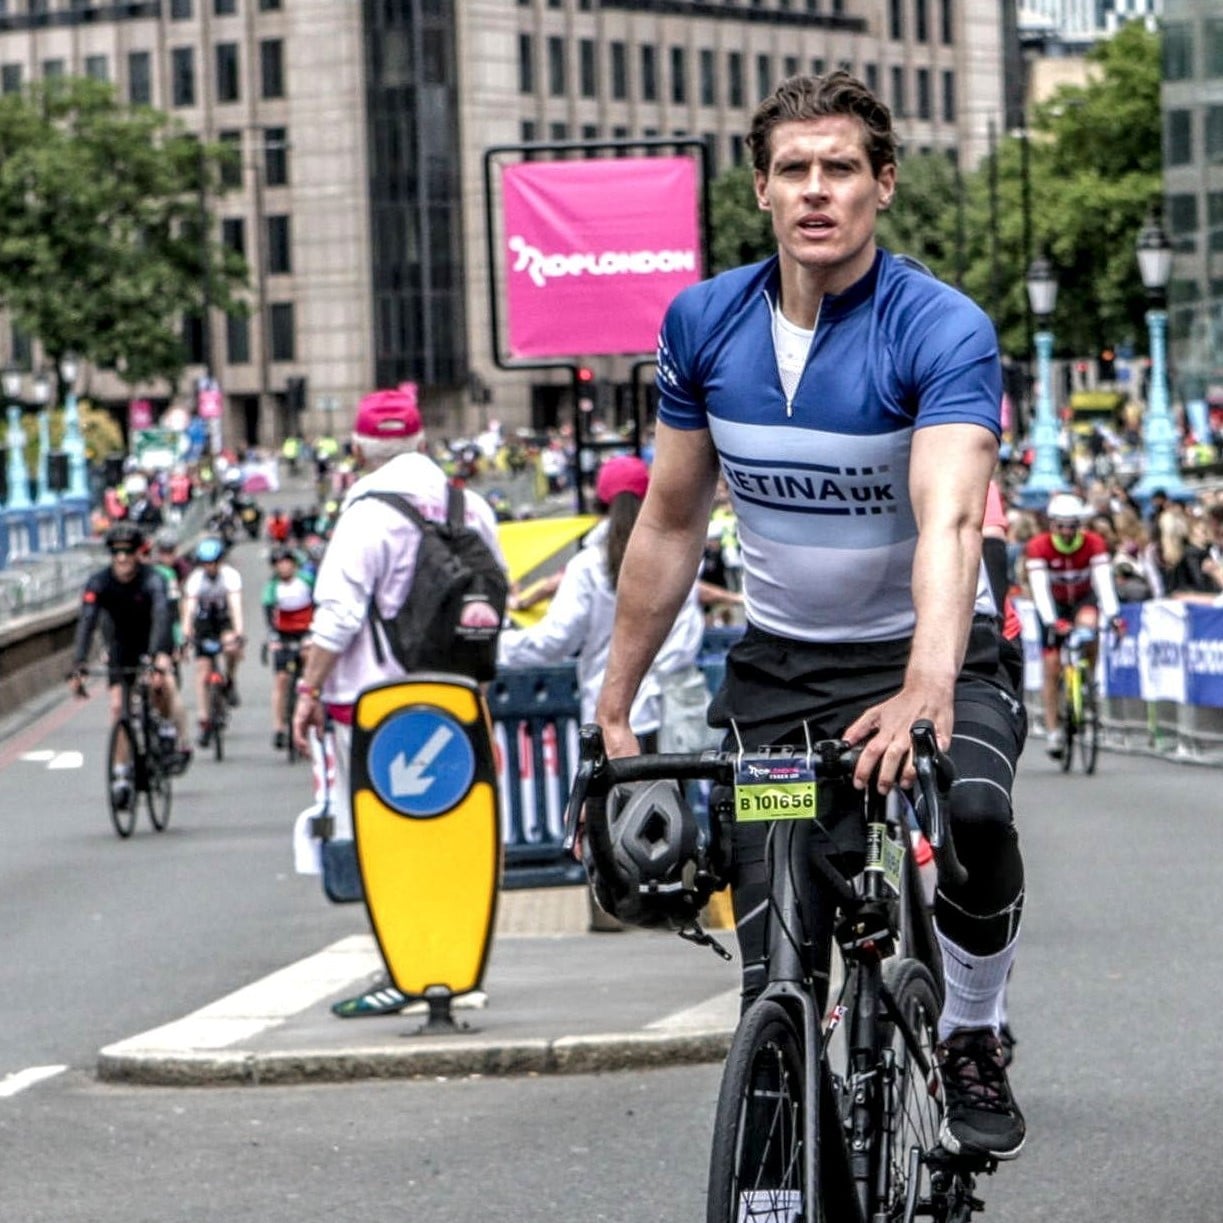 Image shows a cyclist in a blue cycling jersey with 'Retina UK' on the front. He is cycling on a closed road with other cyclists and a RideLondon sign in the background.